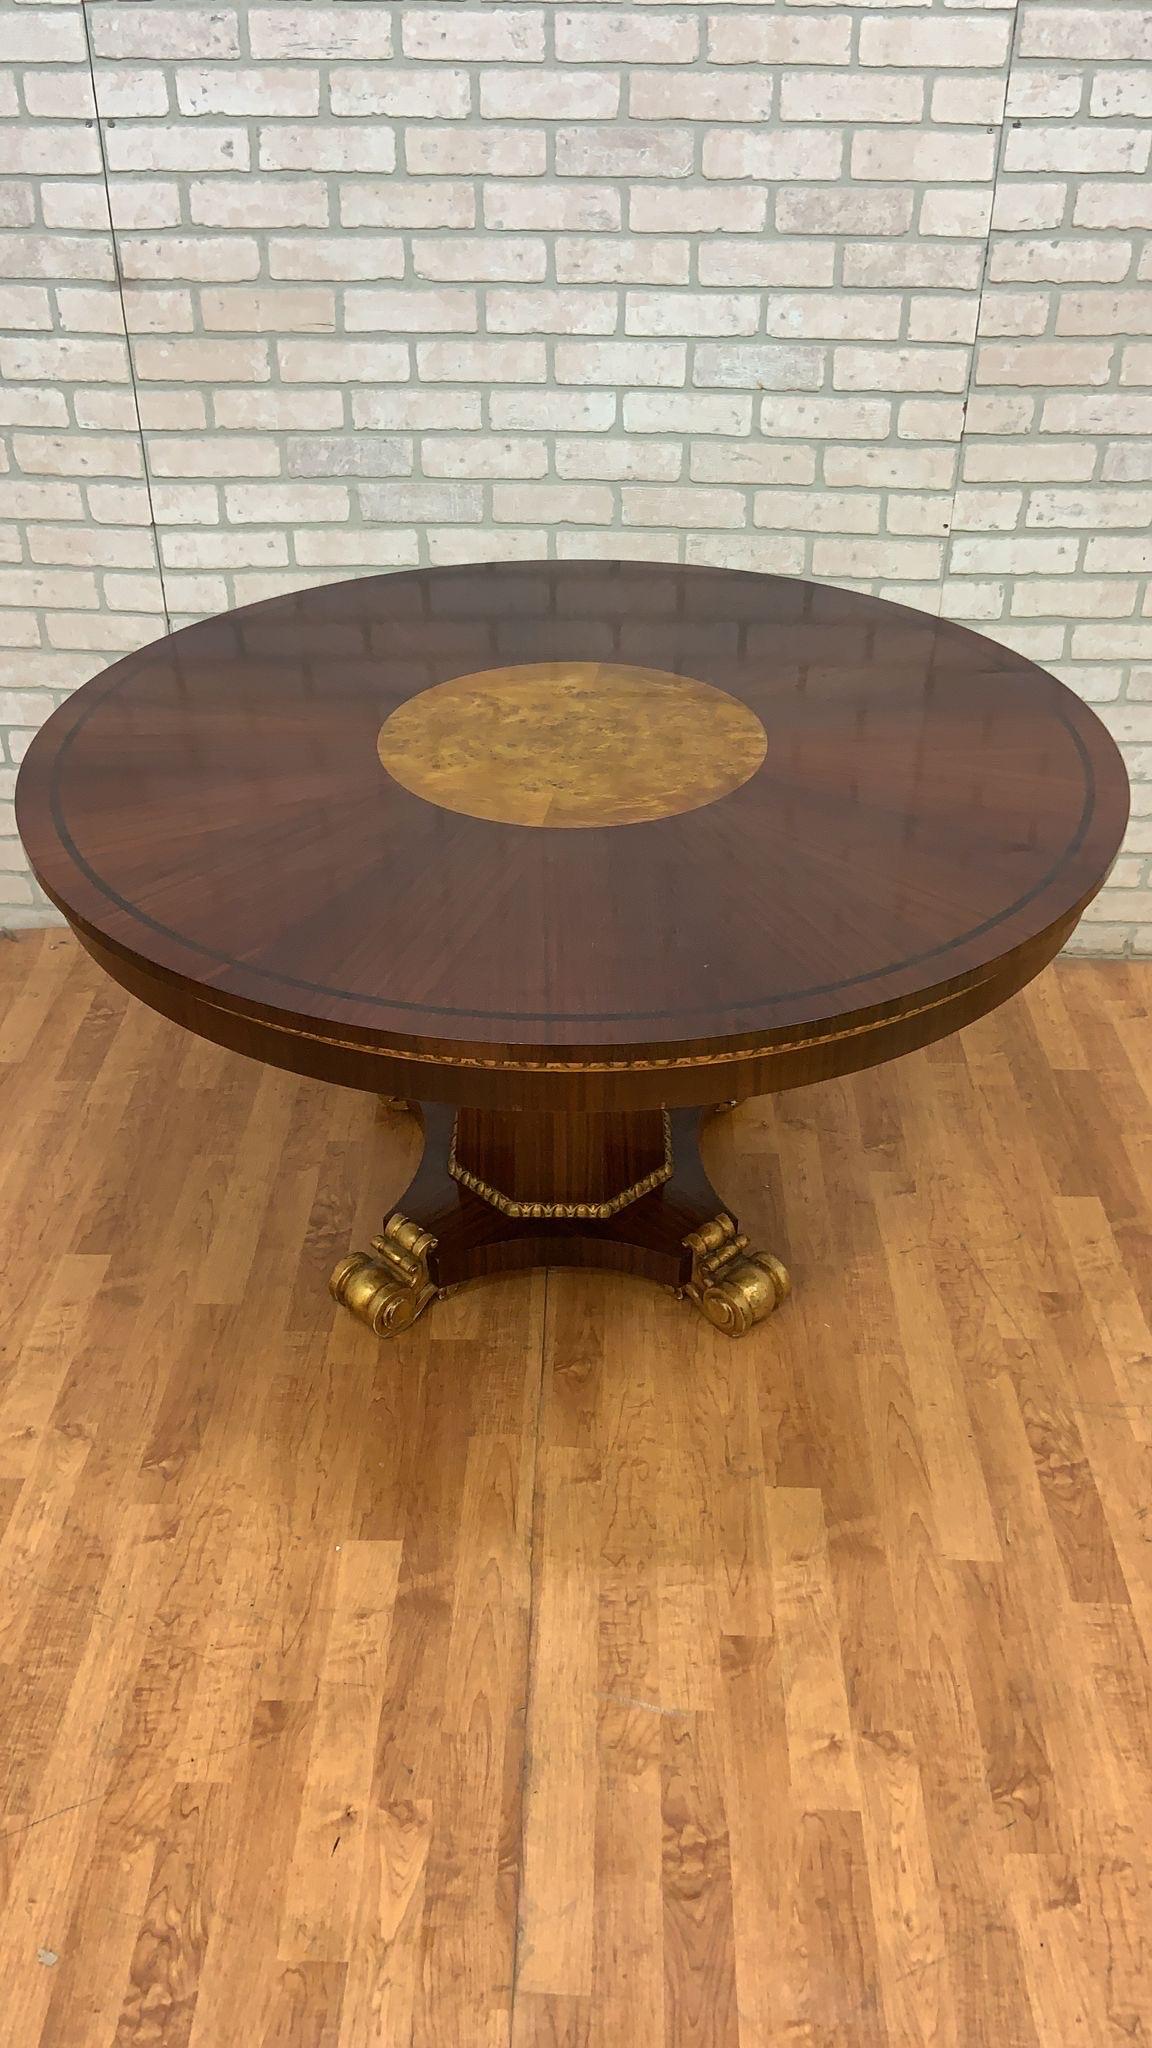 *** Shipping is NOT Free, please read below how to get a shipping quote. 

Antique French Empire Style Round Pedestal Table with Burlwood Center

A gorgeous French Regency style circular mahogany pedestal base table with burled wood center, carved